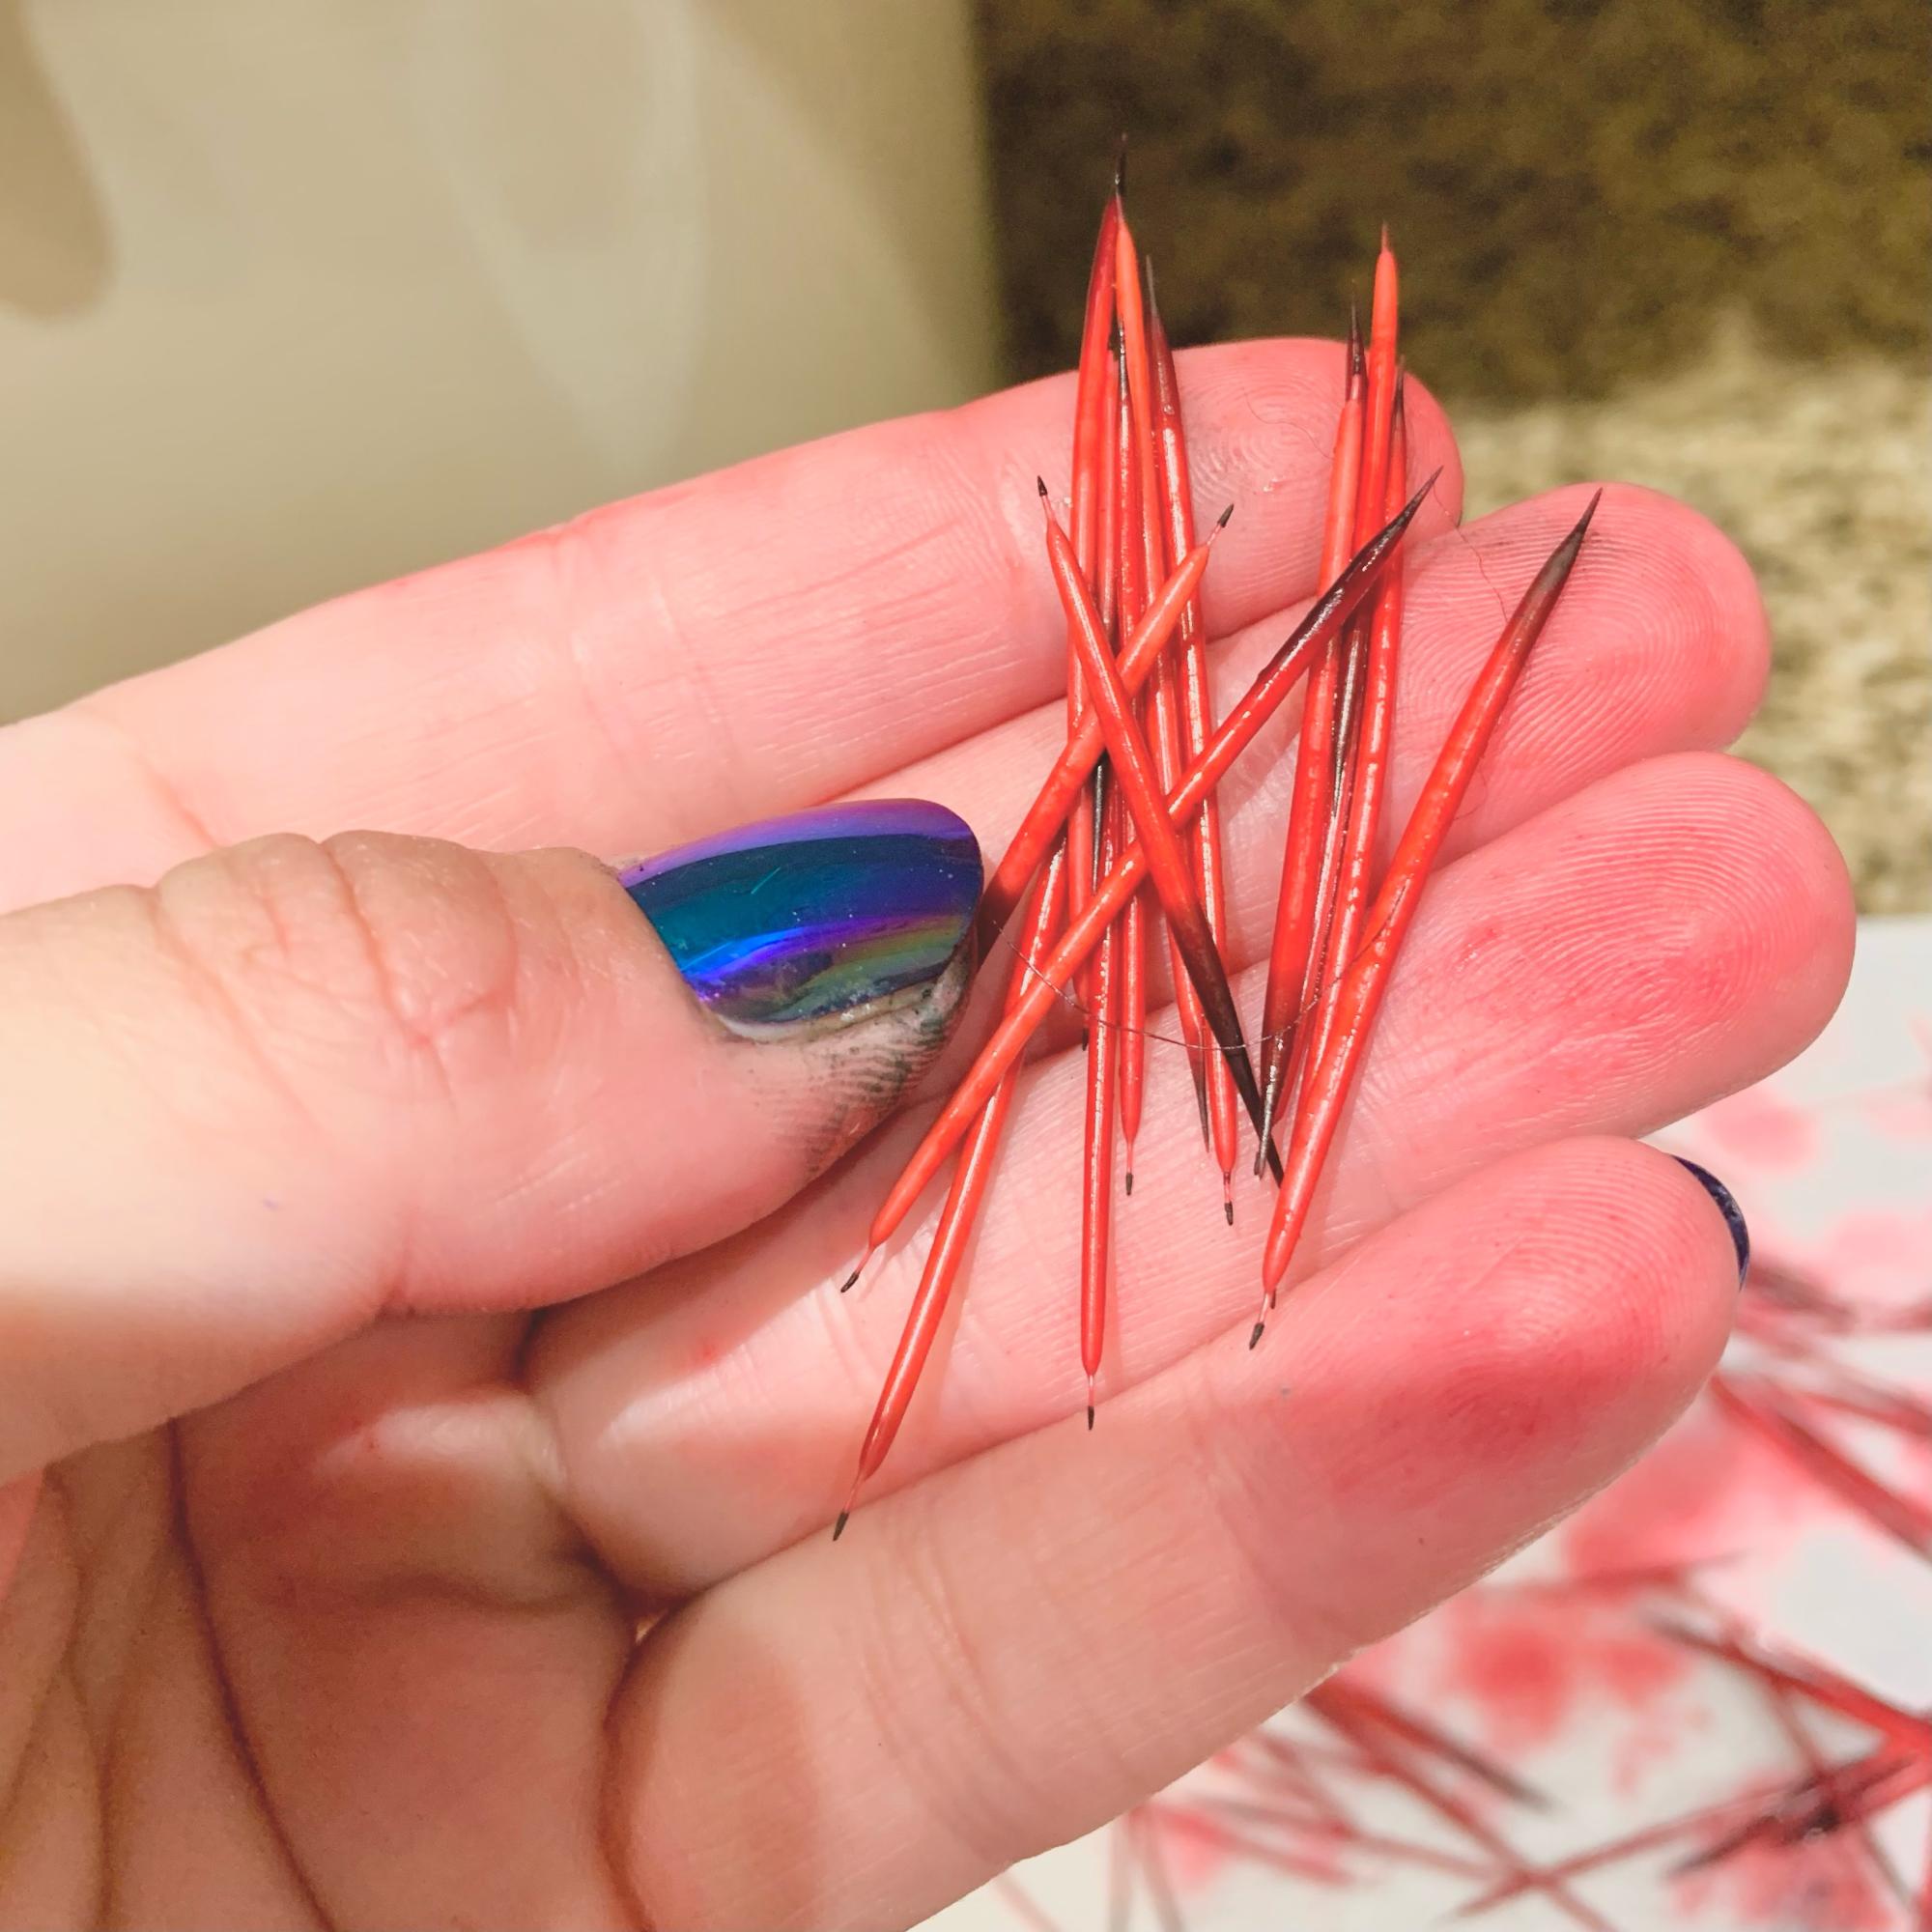 [ID: Hand with blue nail polish holding freshly dyed red porcupine quills. Other red quills are drying on a paper towel in the background."]